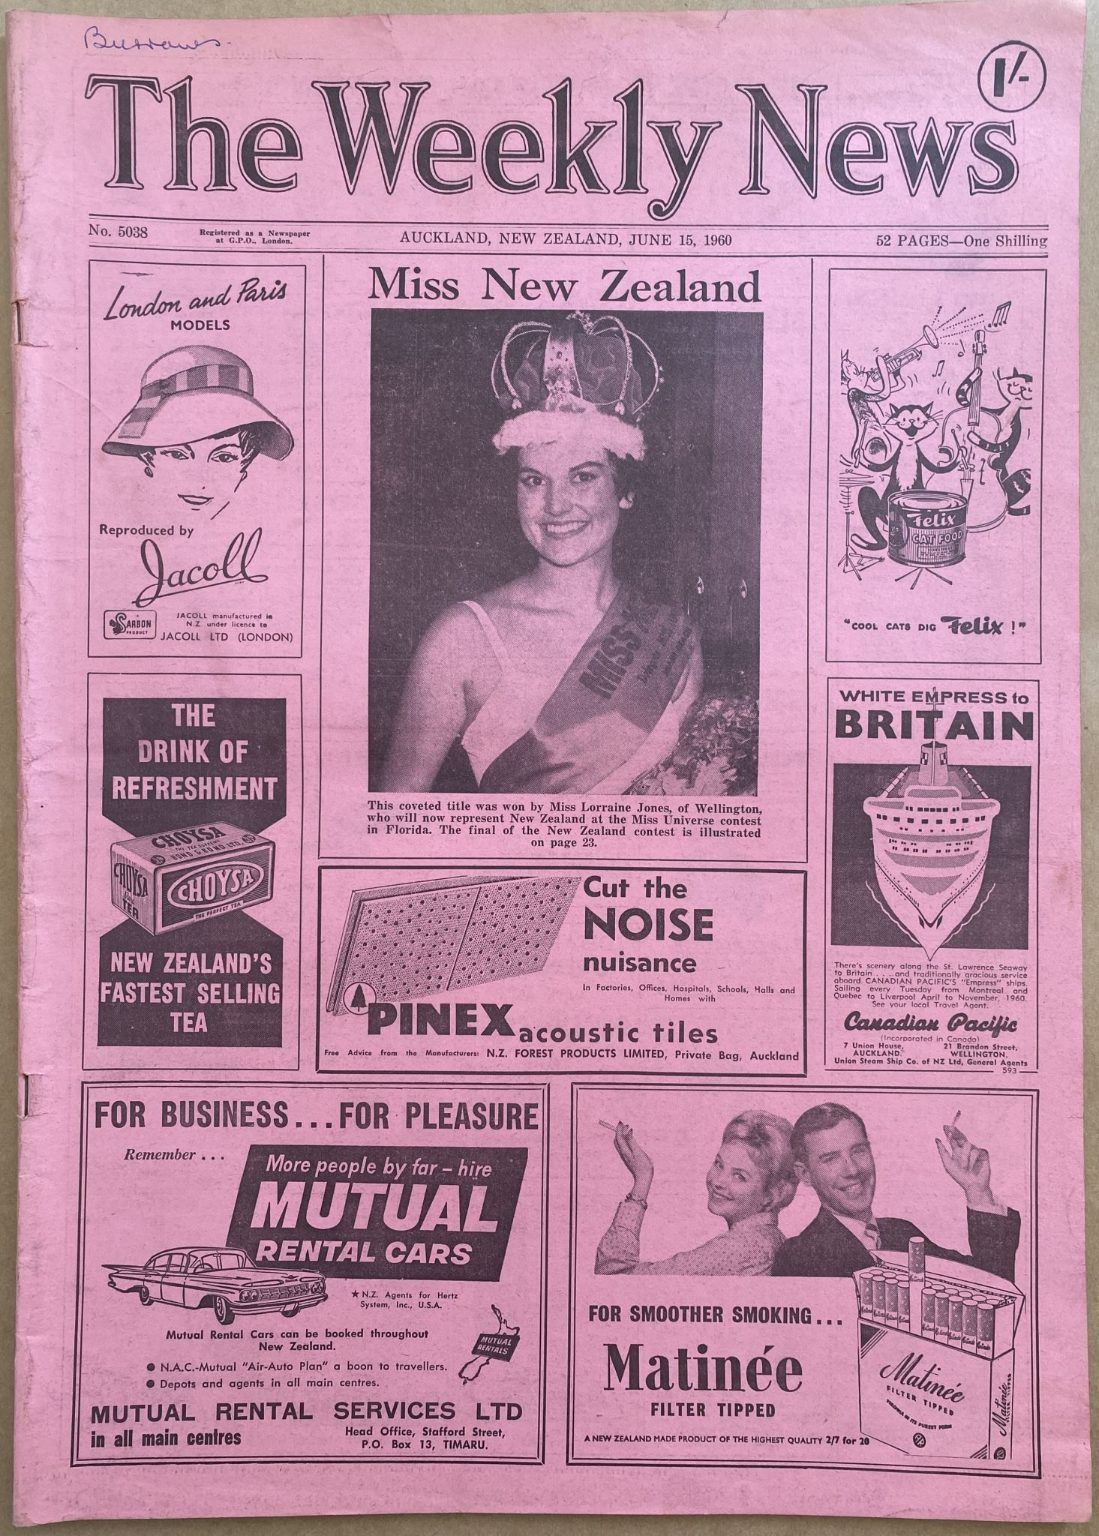 OLD NEWSPAPER: The Weekly News, No. 5038, 15 June 1960